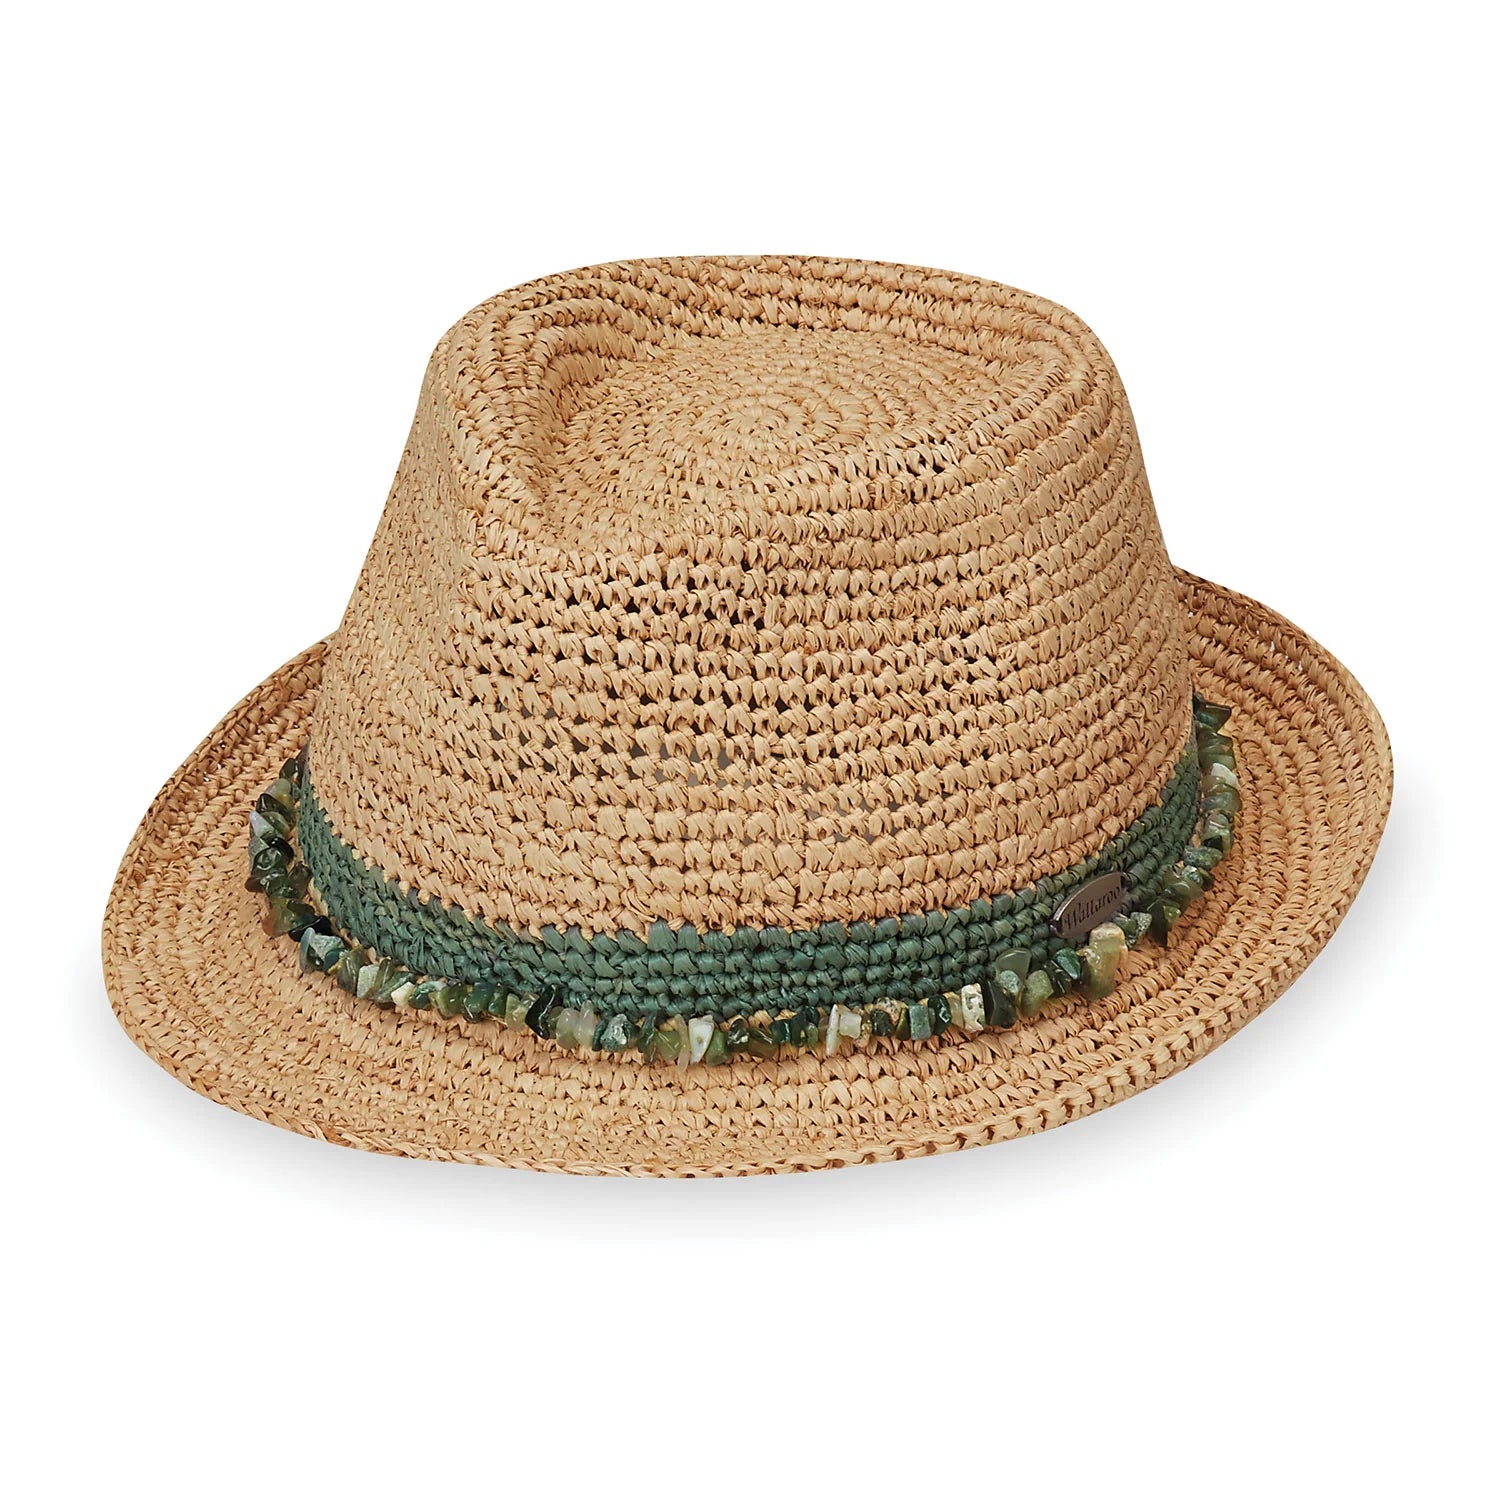 A marriage of tropical materials with urban style, the Tahiti short brim sun hat can be worn anywhere your travels take you.